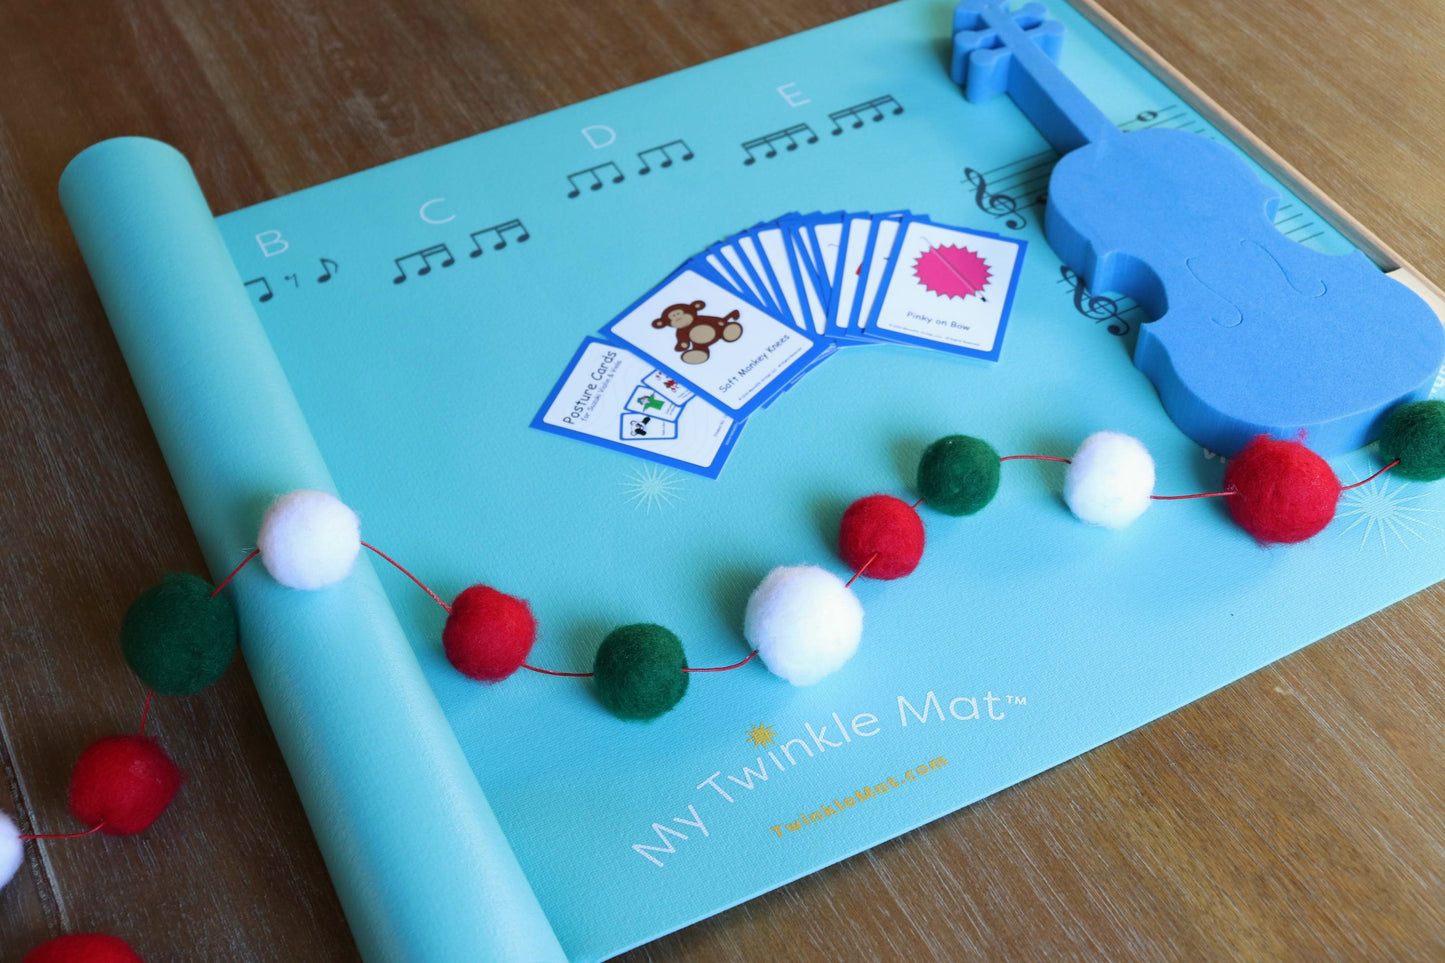 My Twinkle Mat Twinkl'in Starter Set With Posture Cards